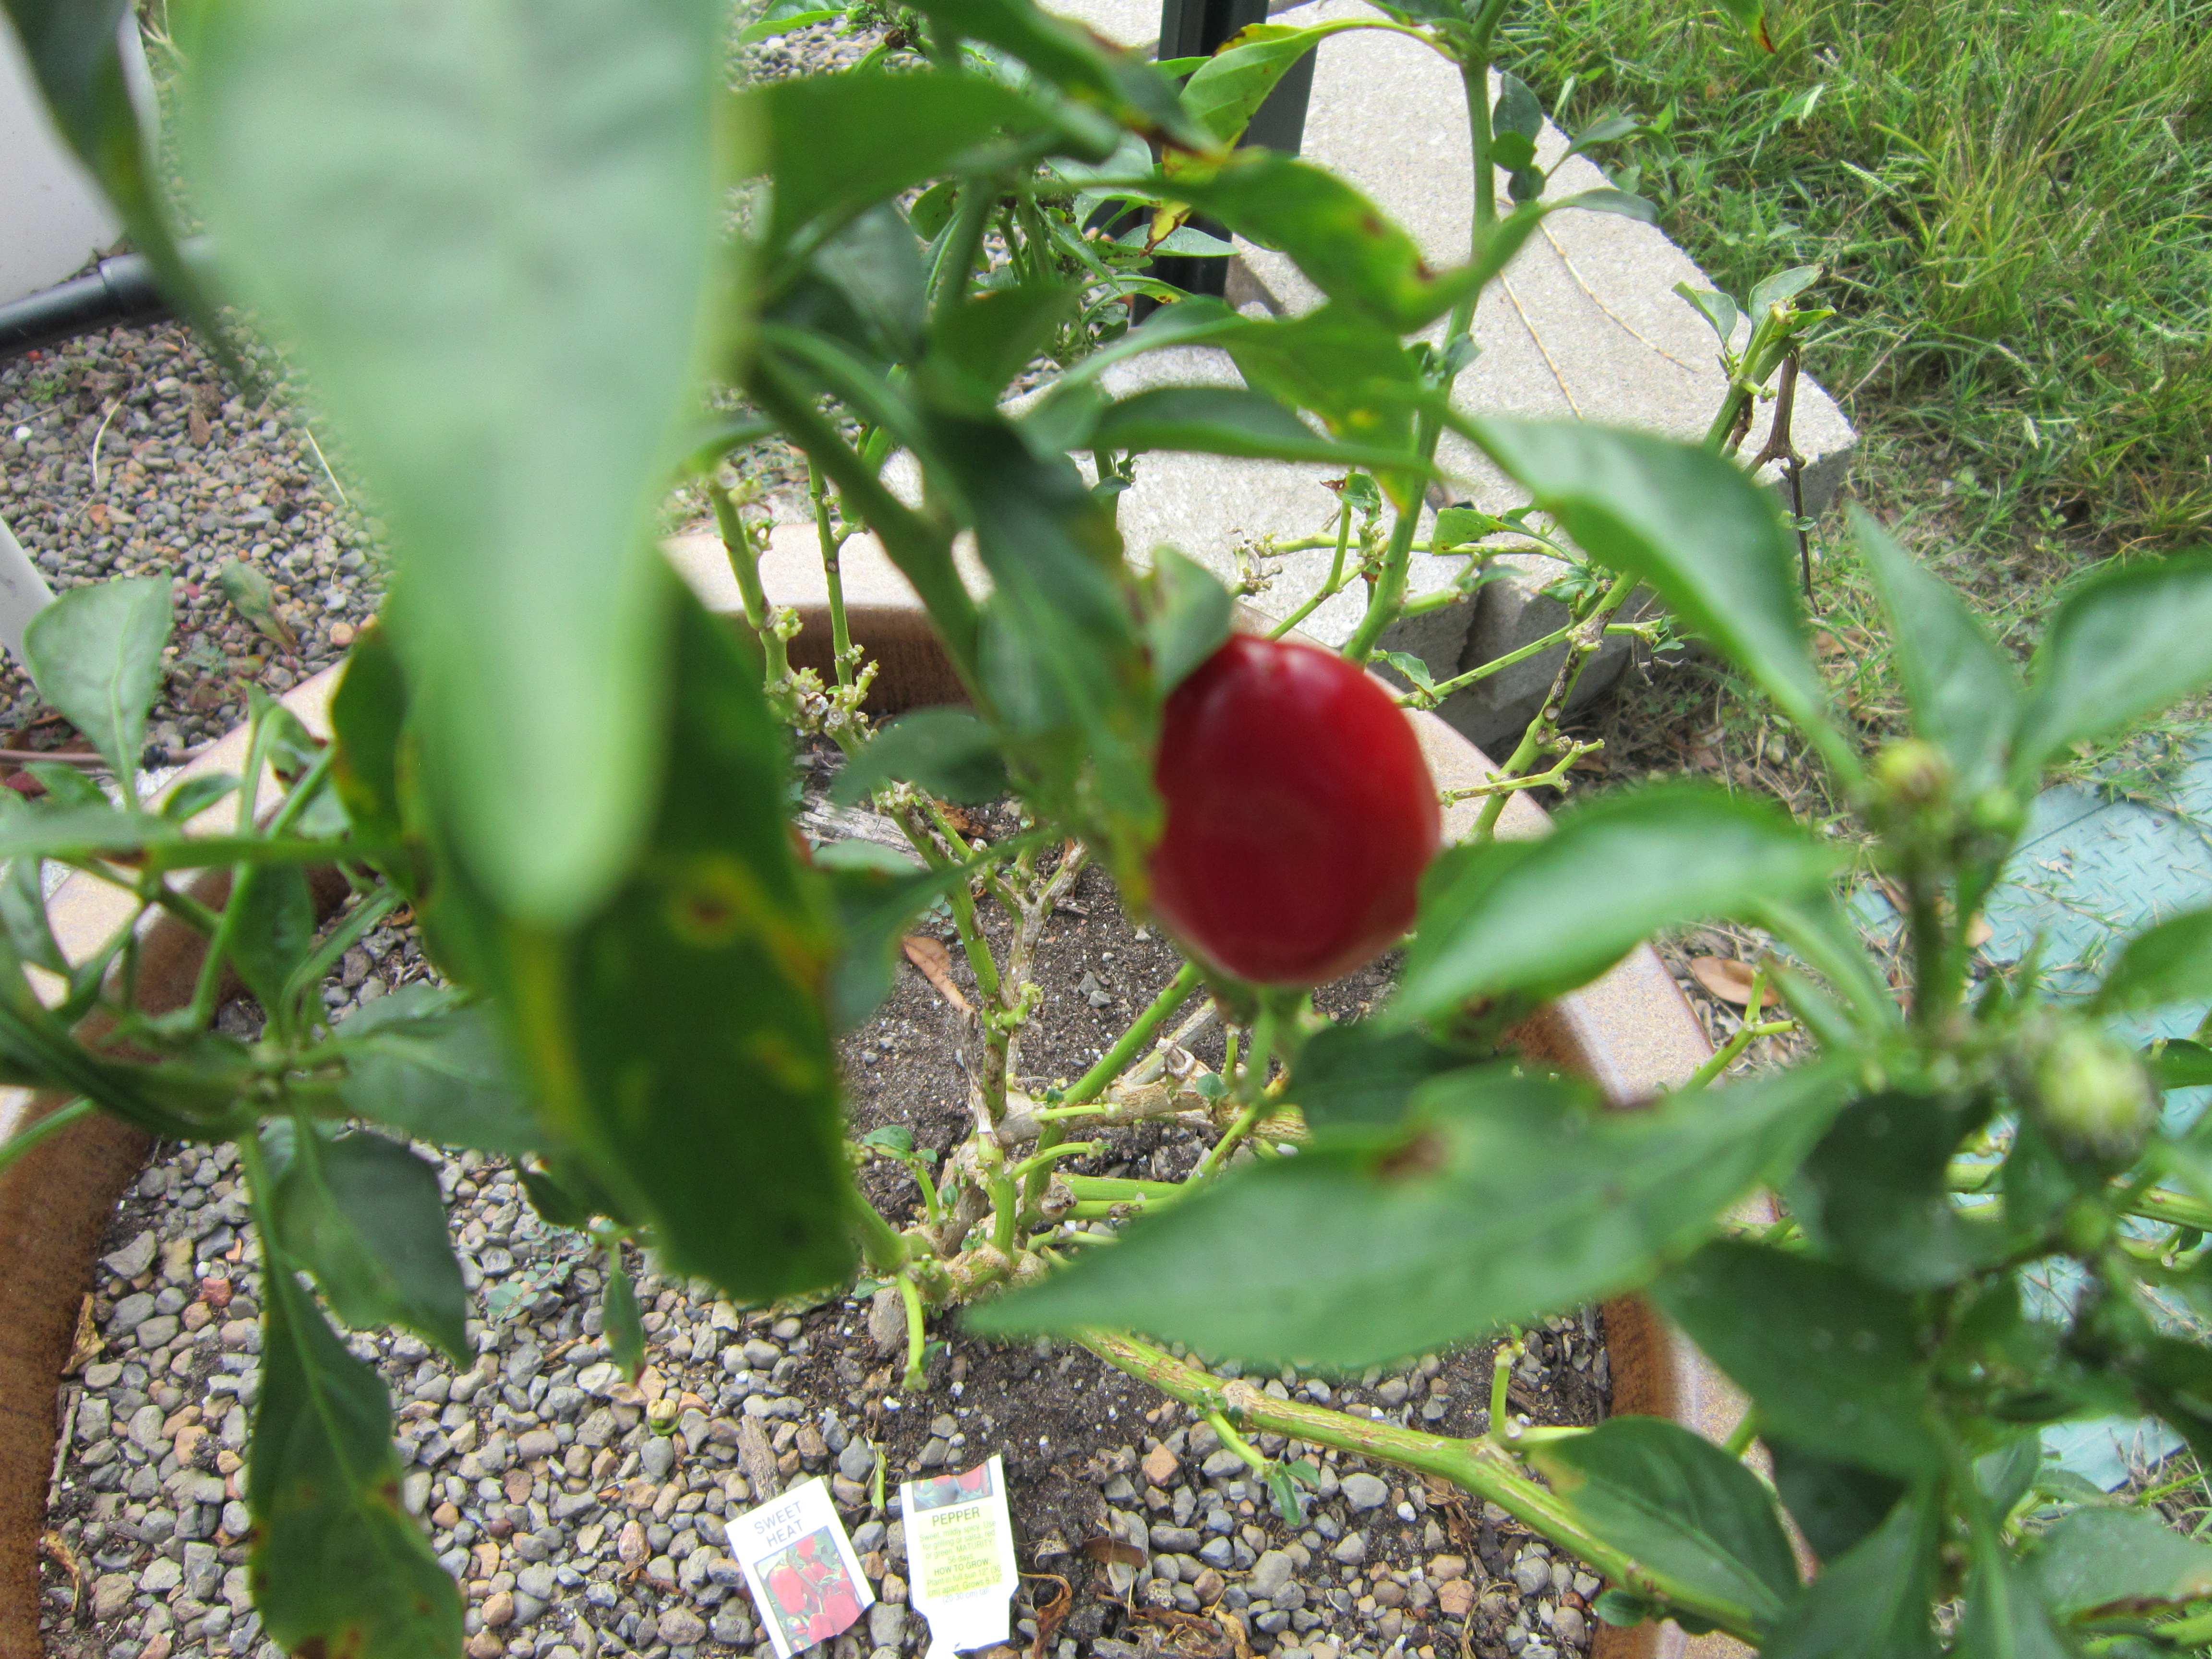 A closer look at the sweet peppers